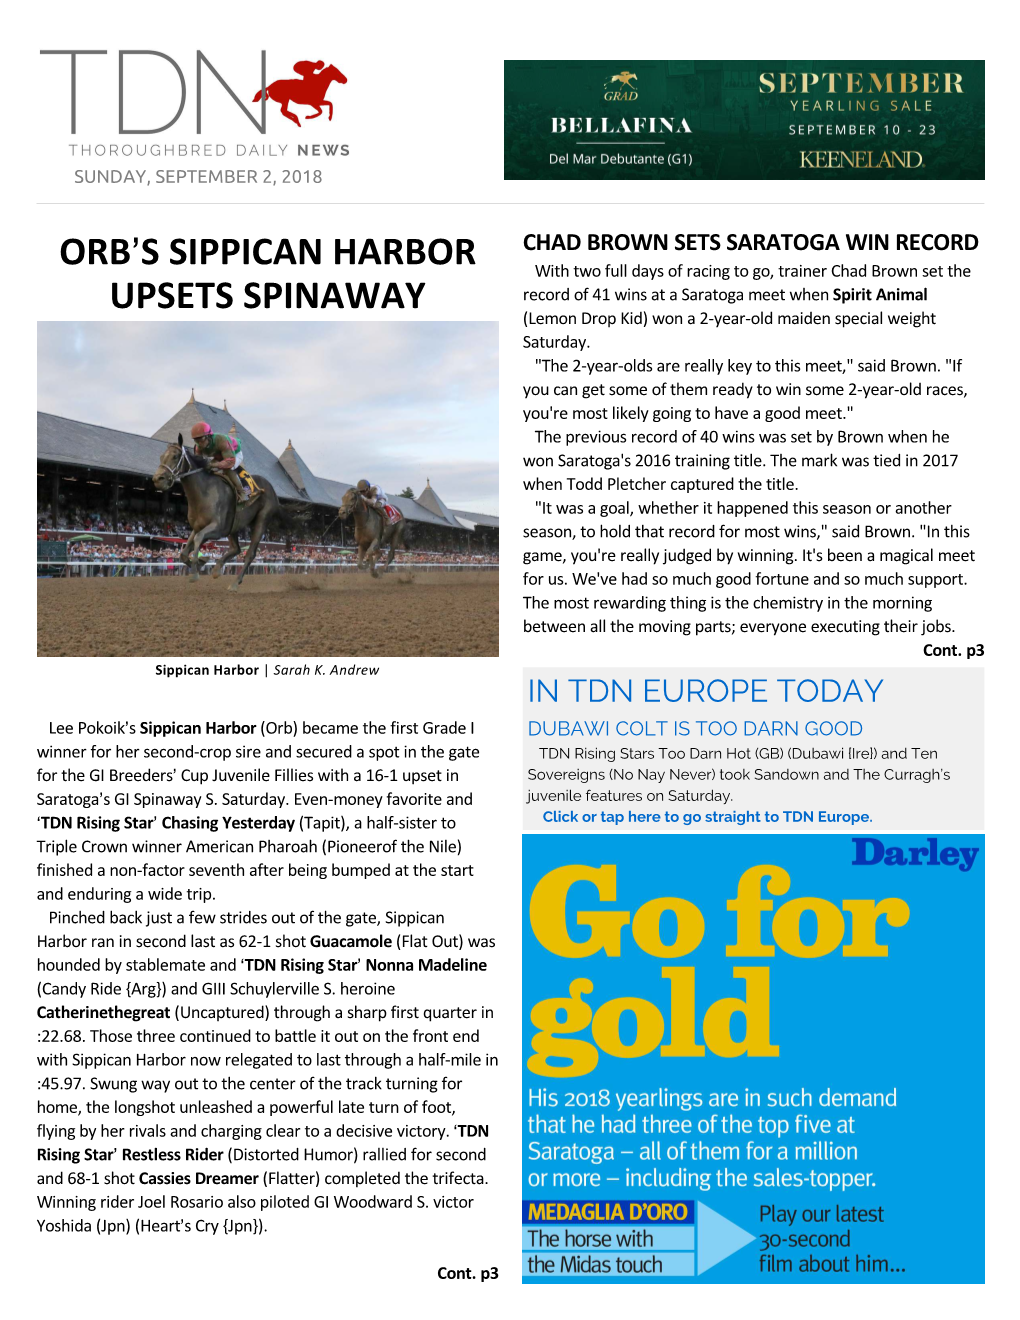 Orb=S Sippican Harbor Upsets Spinaway